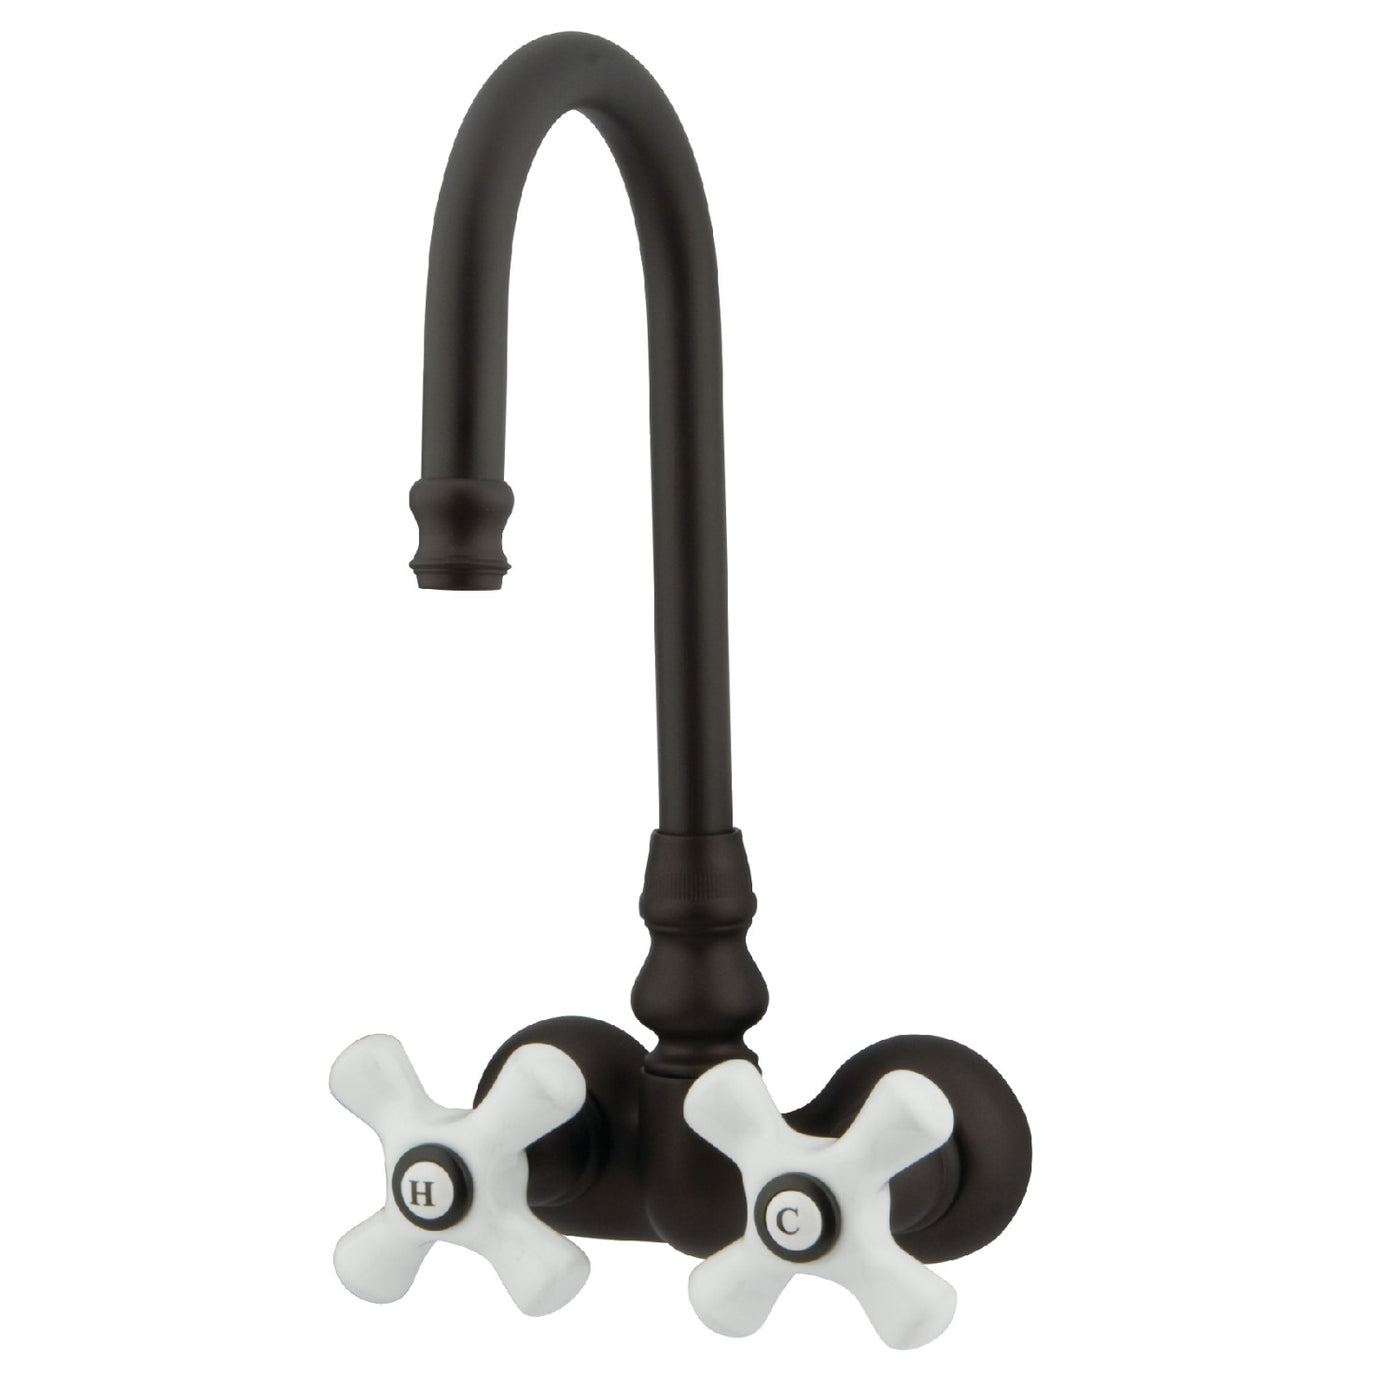 Elements of Design DT0715PX 3-3/8-Inch Wall Mount Tub Faucet, Oil Rubbed Bronze